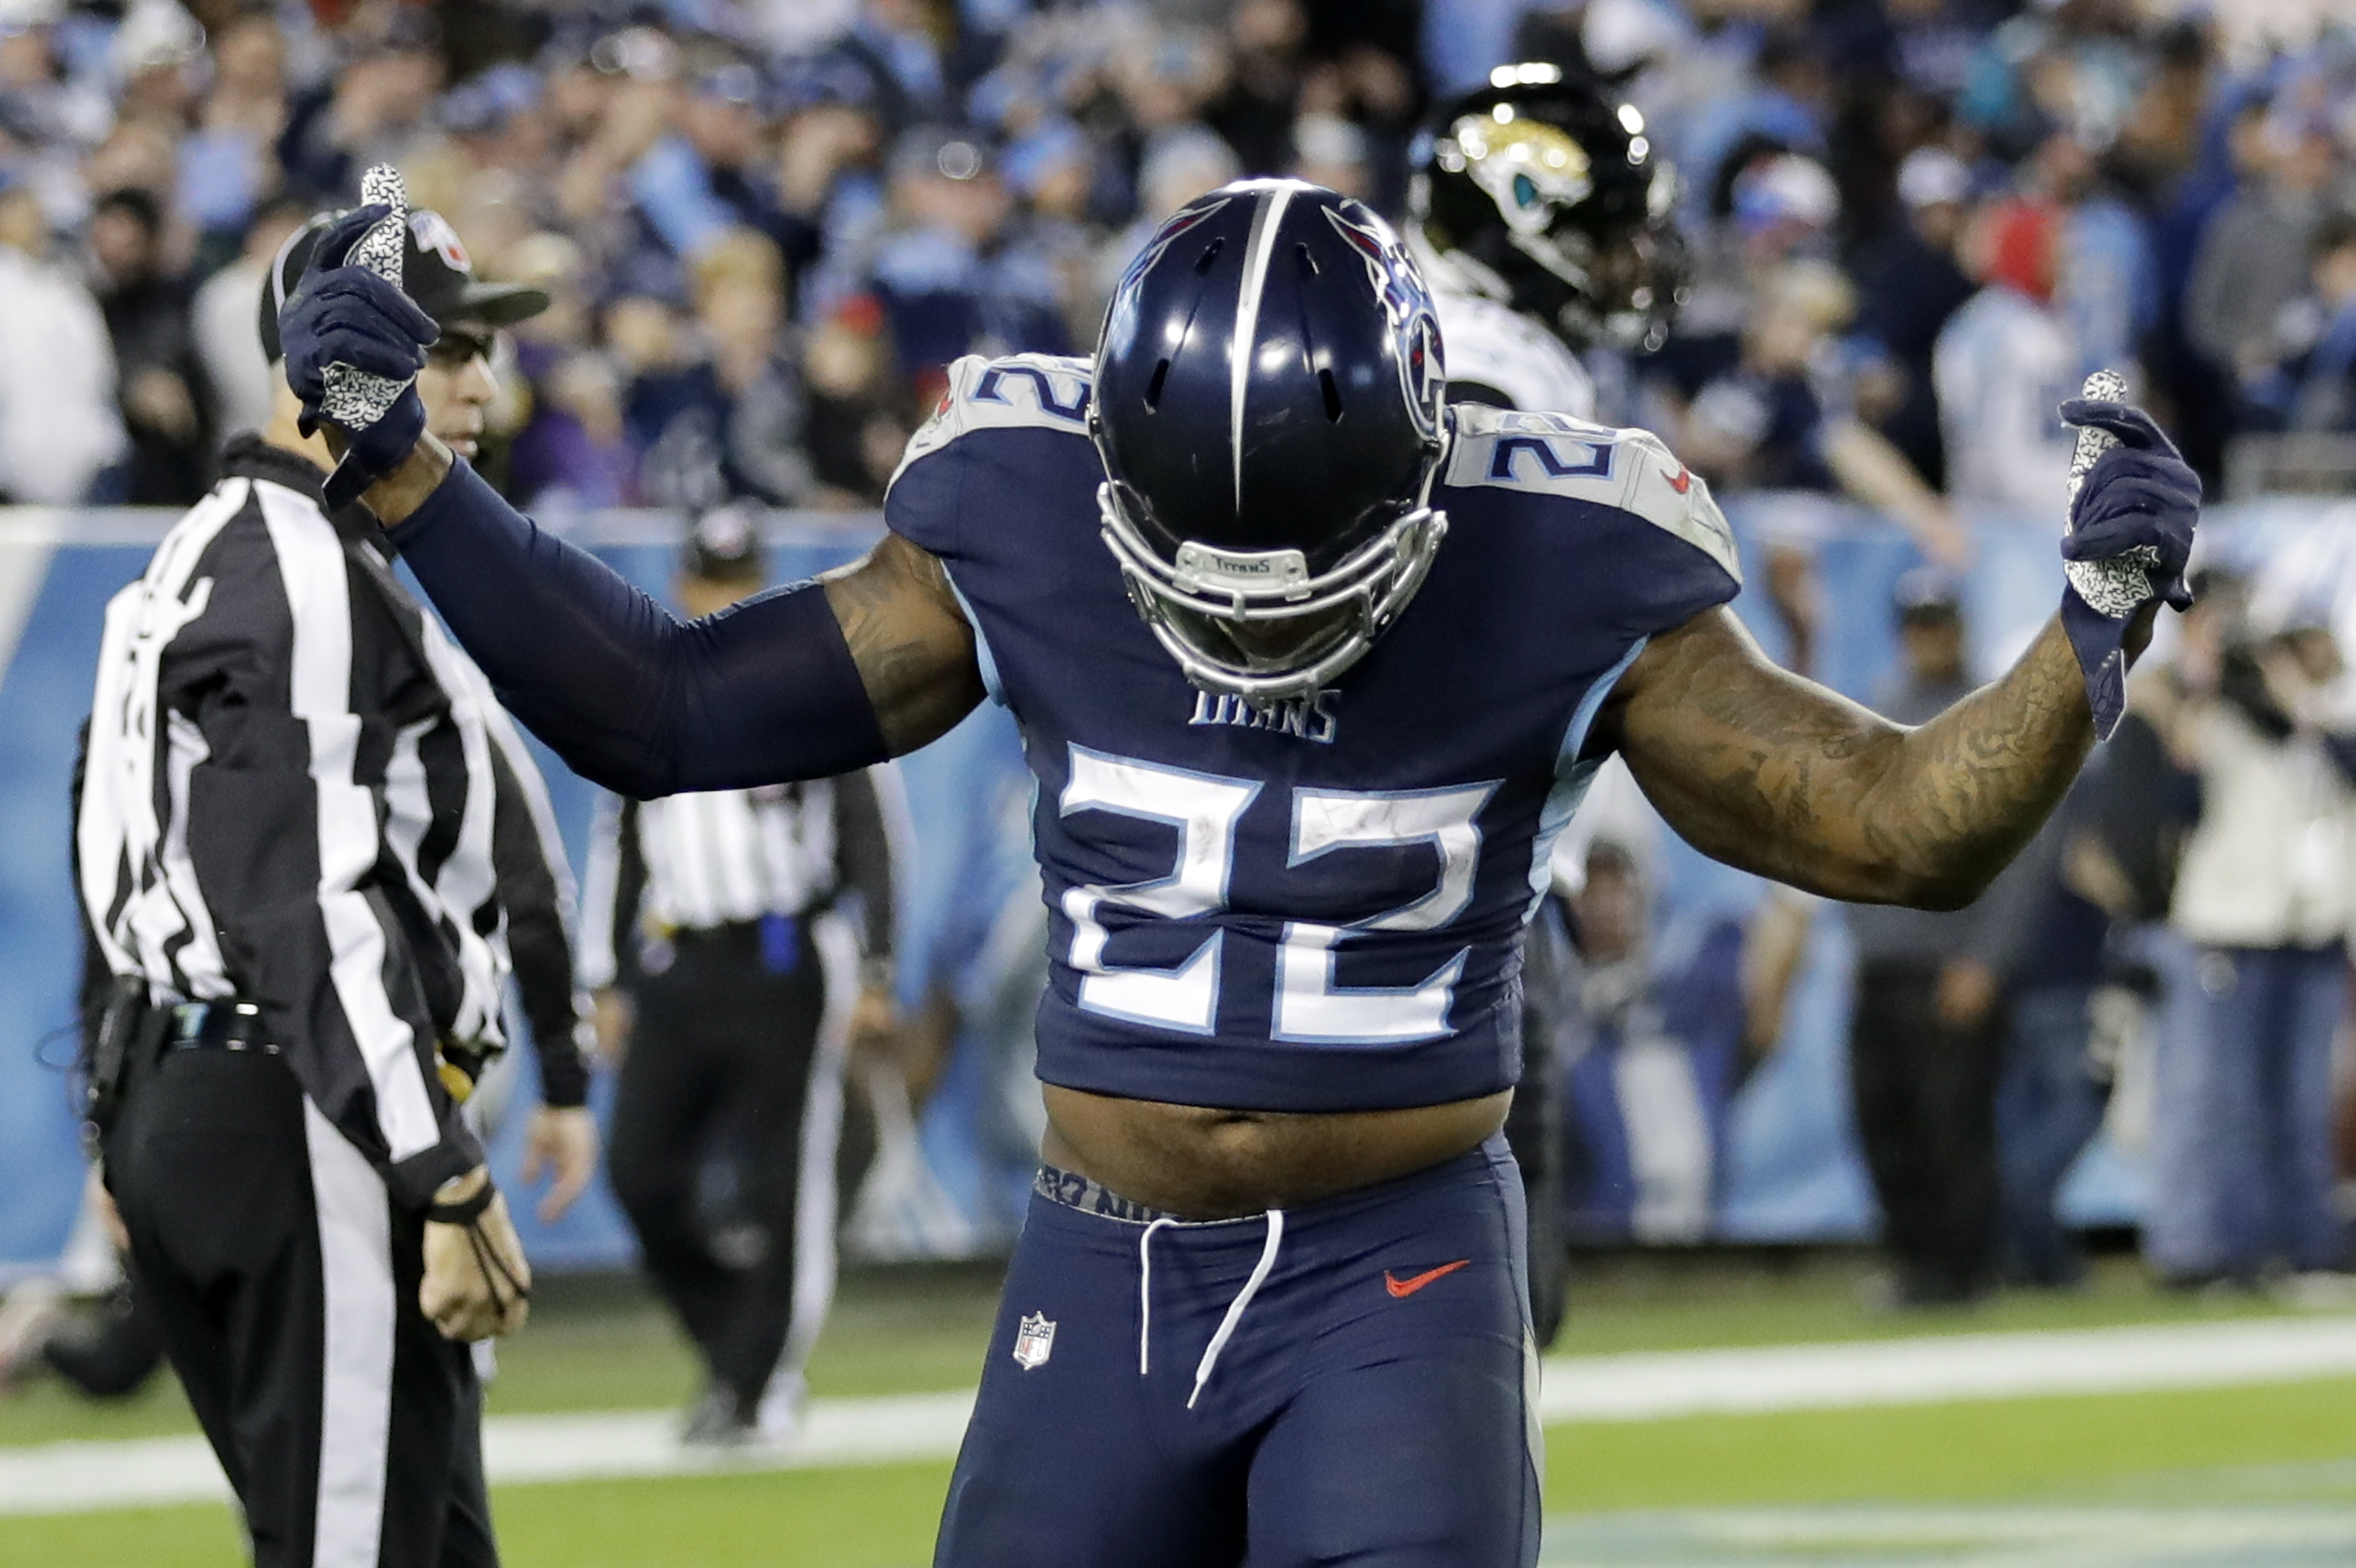 Titans explode for 4 TDs in 6 plays, rout Jaguars 42-20